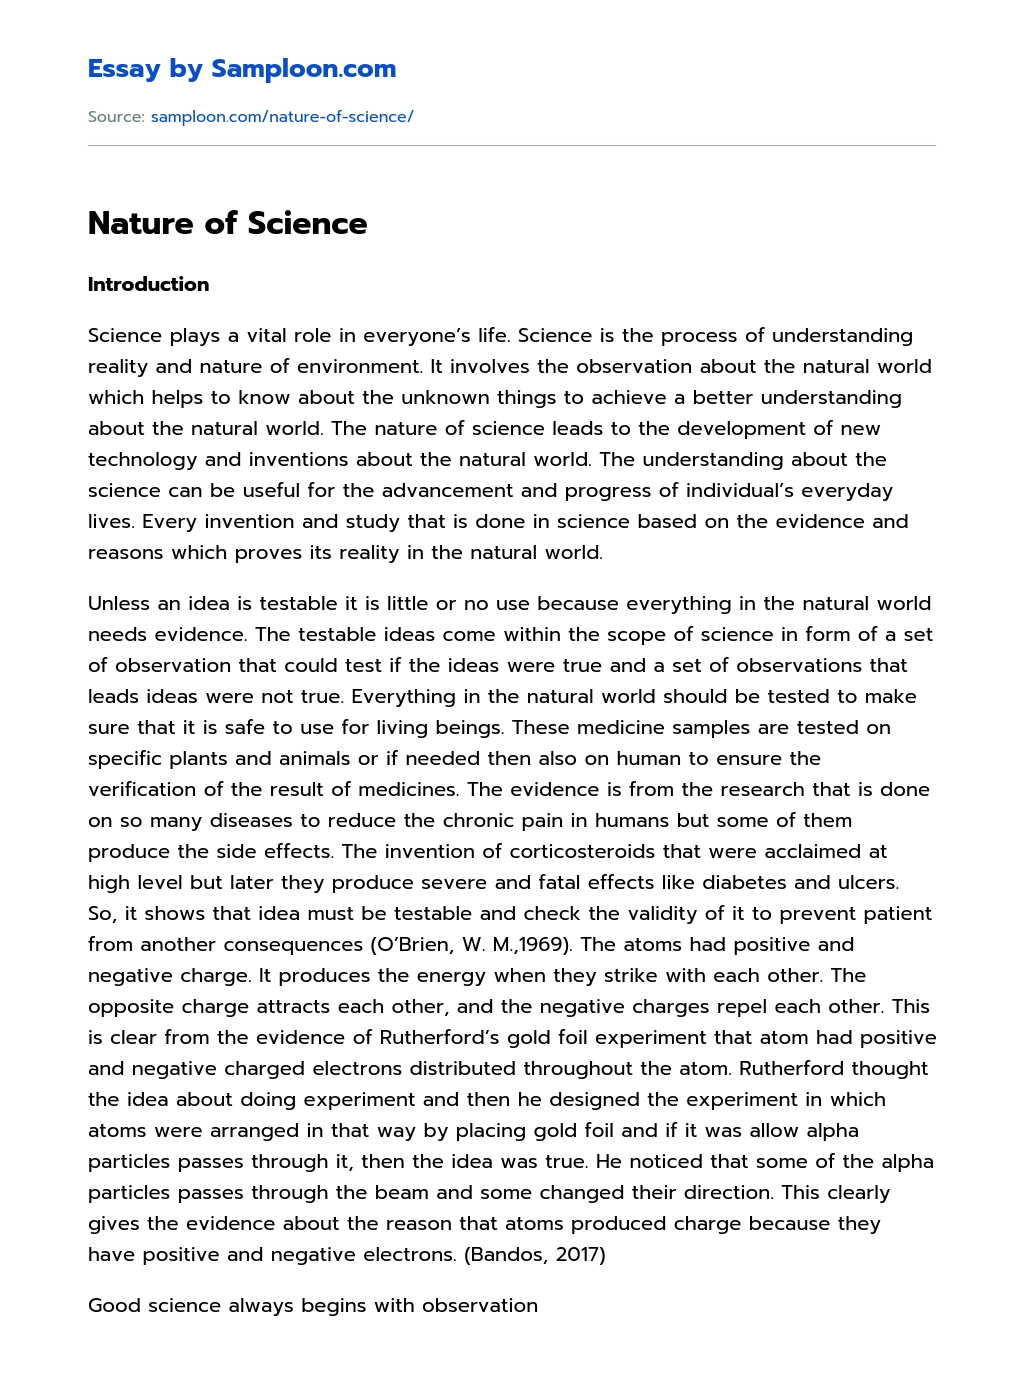 Nature of Science essay